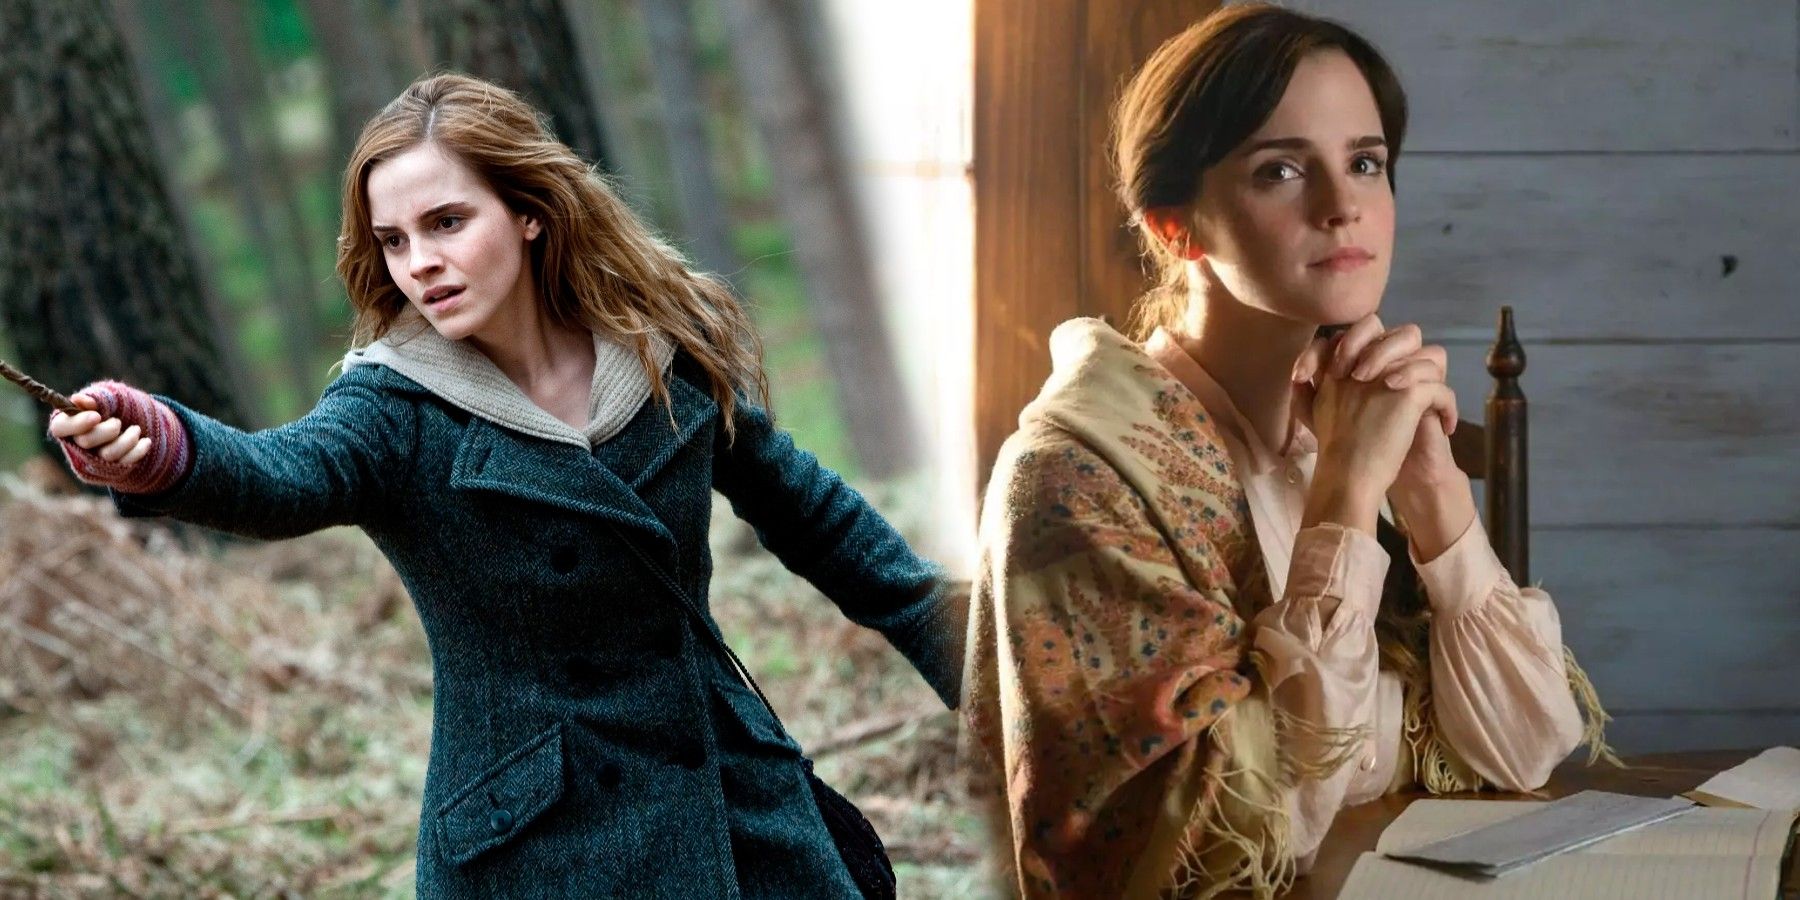 Harry Potter': What The Movies Changed About Hermione Granger